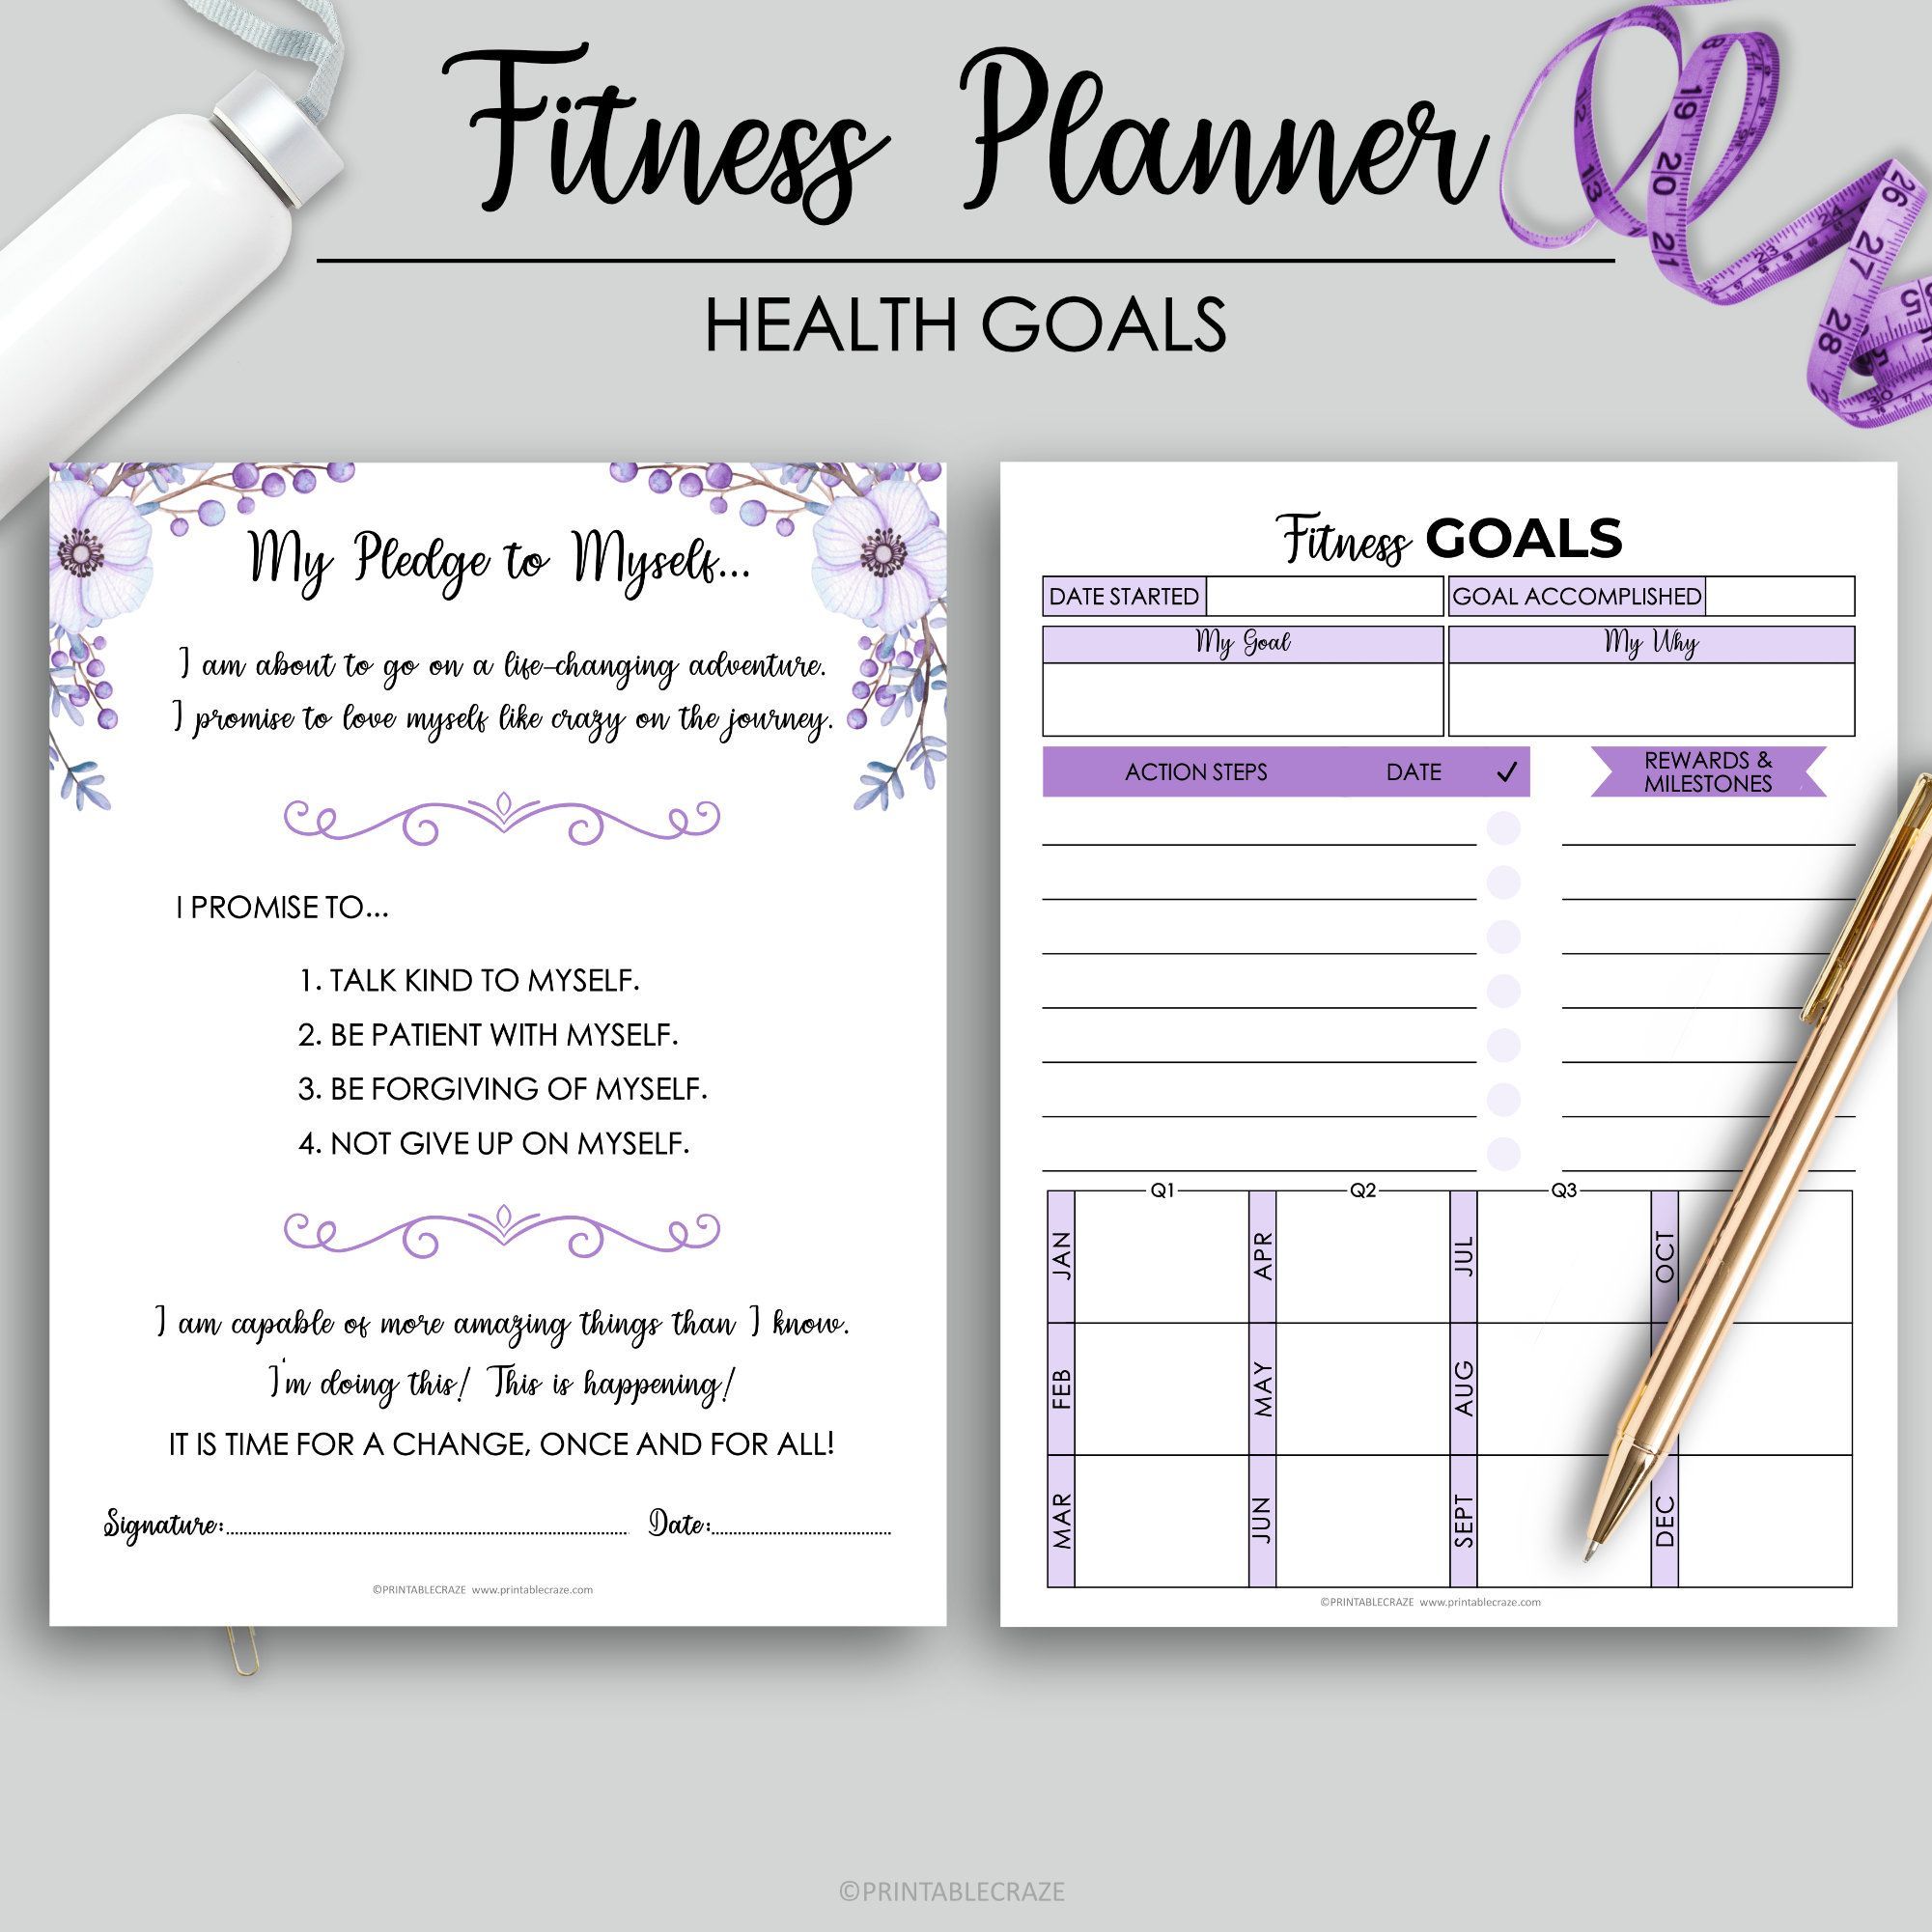 fitness Planner pages